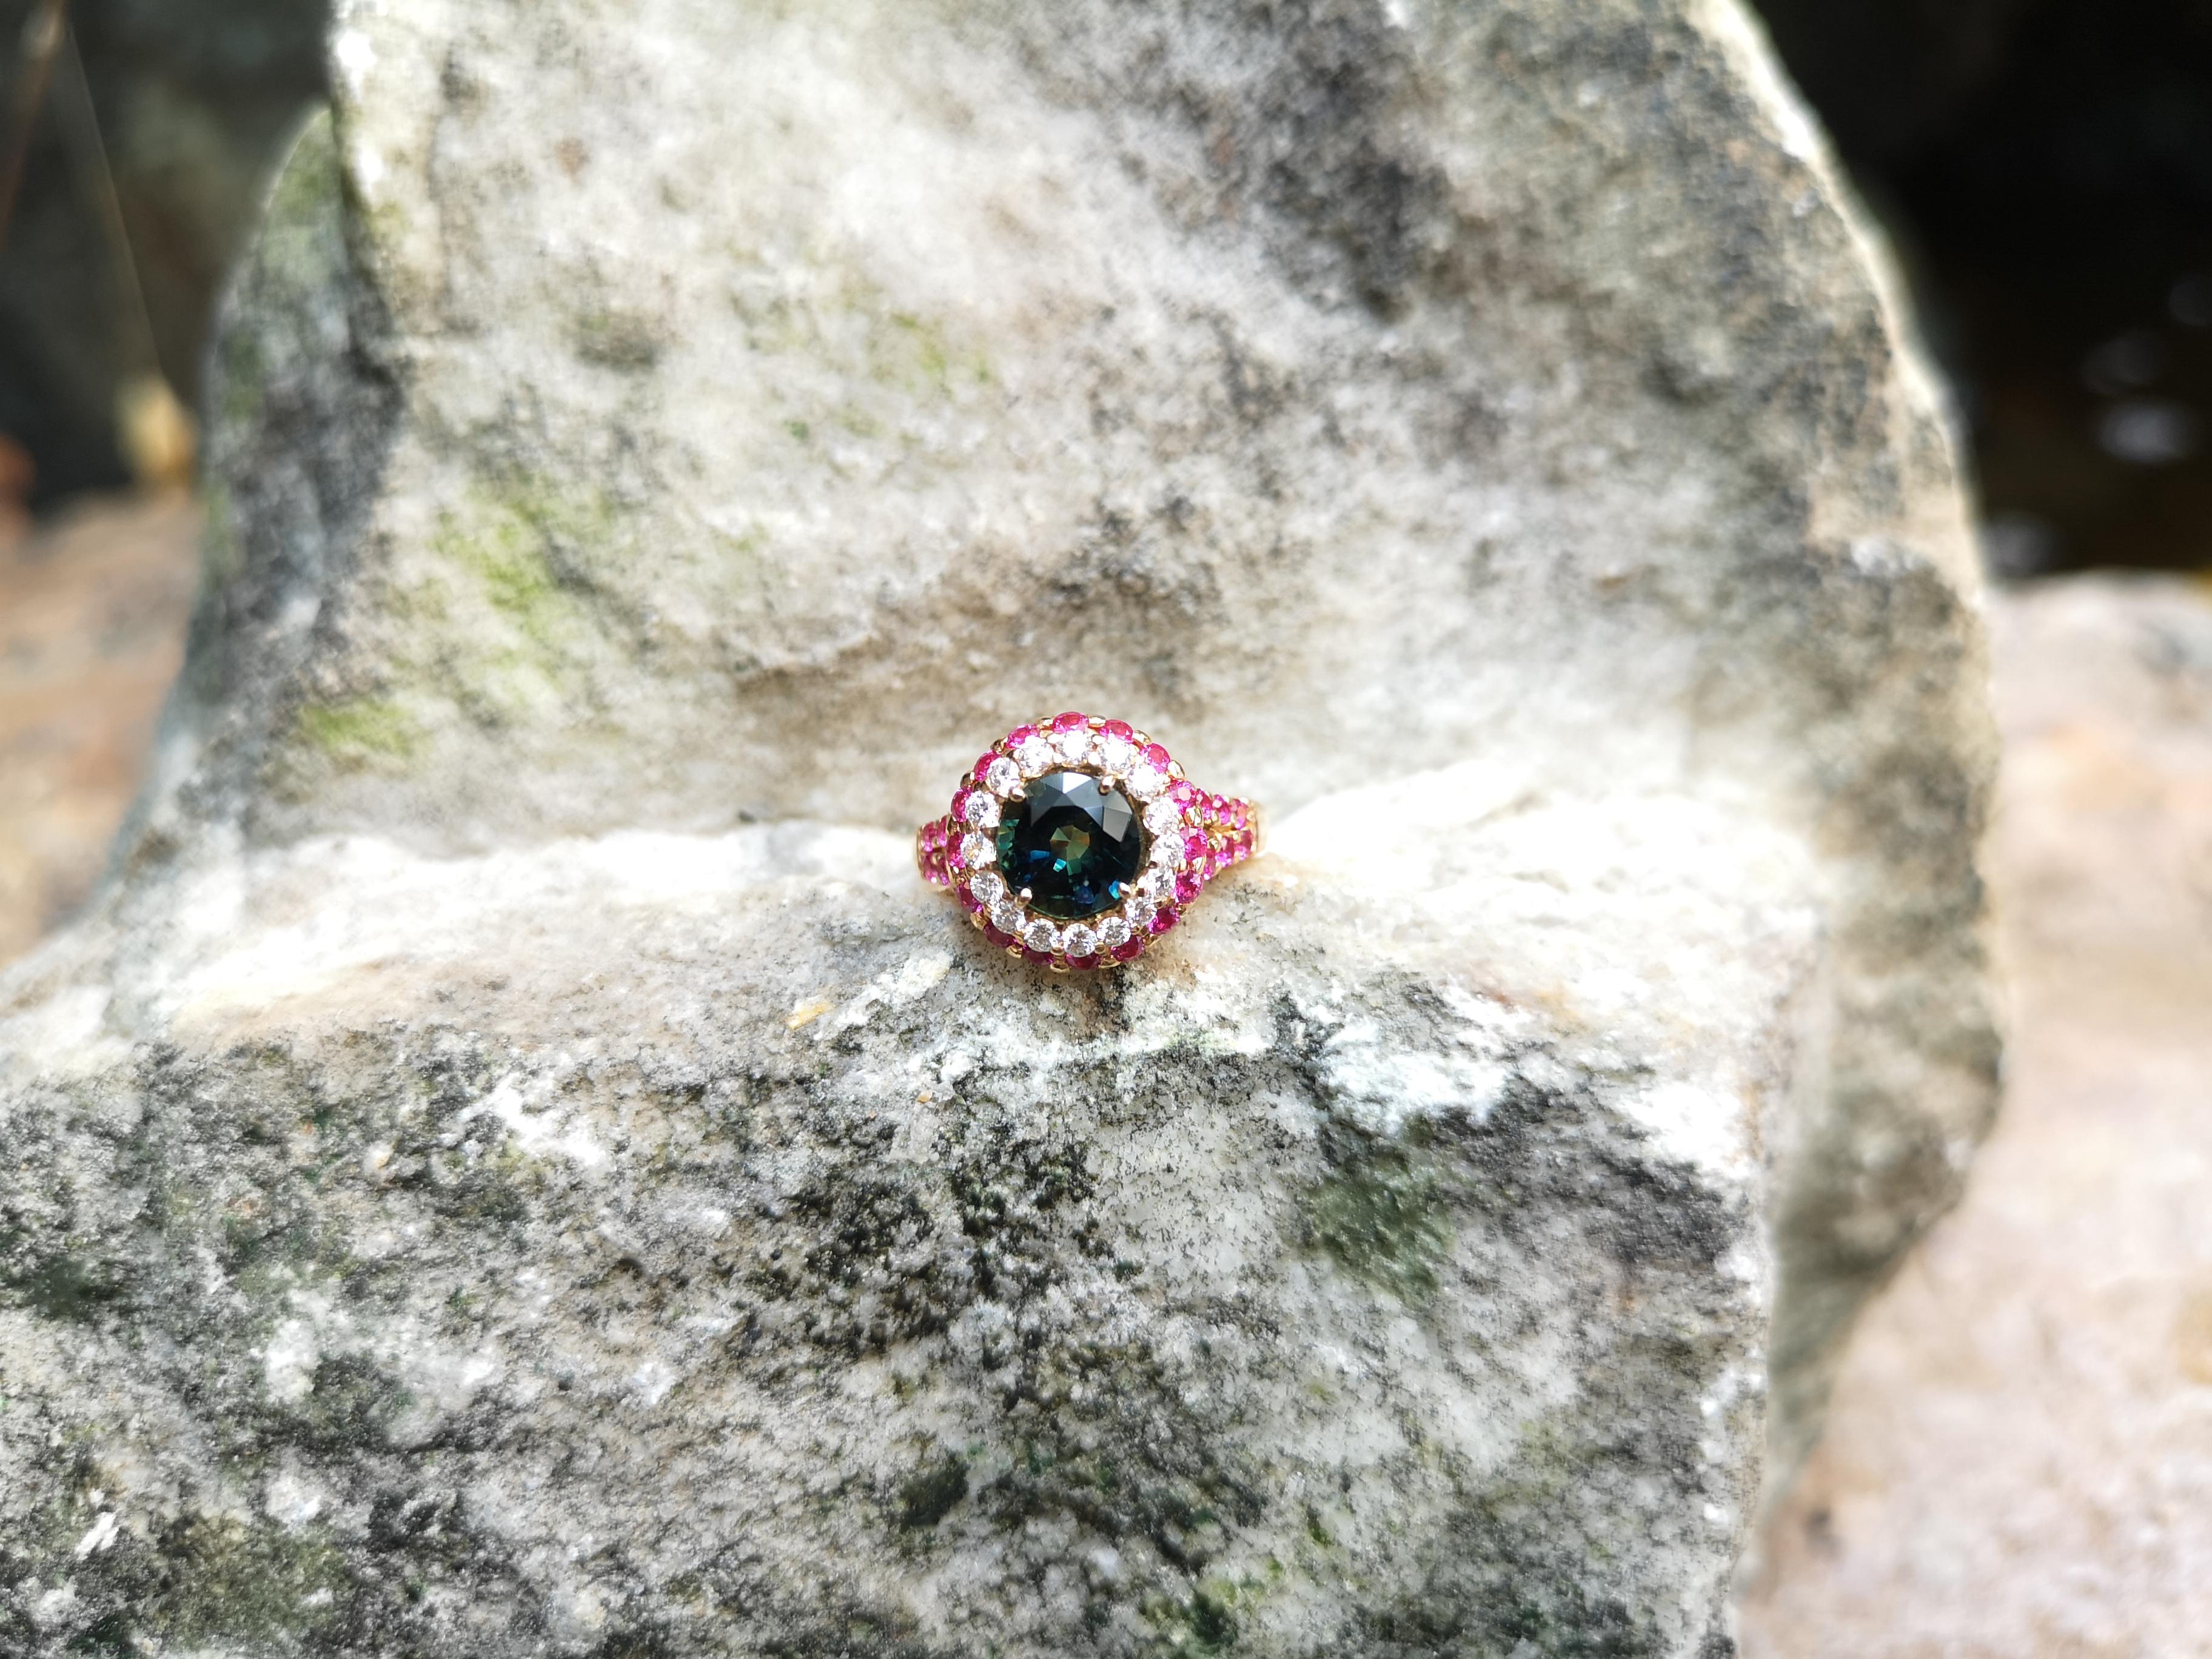 Green Sapphire 1.61 carats with Pink Sapphire 0.69 carat and Diamond 0.31 carat Ring set in 18 Karat Rose Gold Settings

Width: 1.3 cm
Length: 1.3 cm 
Ring Size: 51

